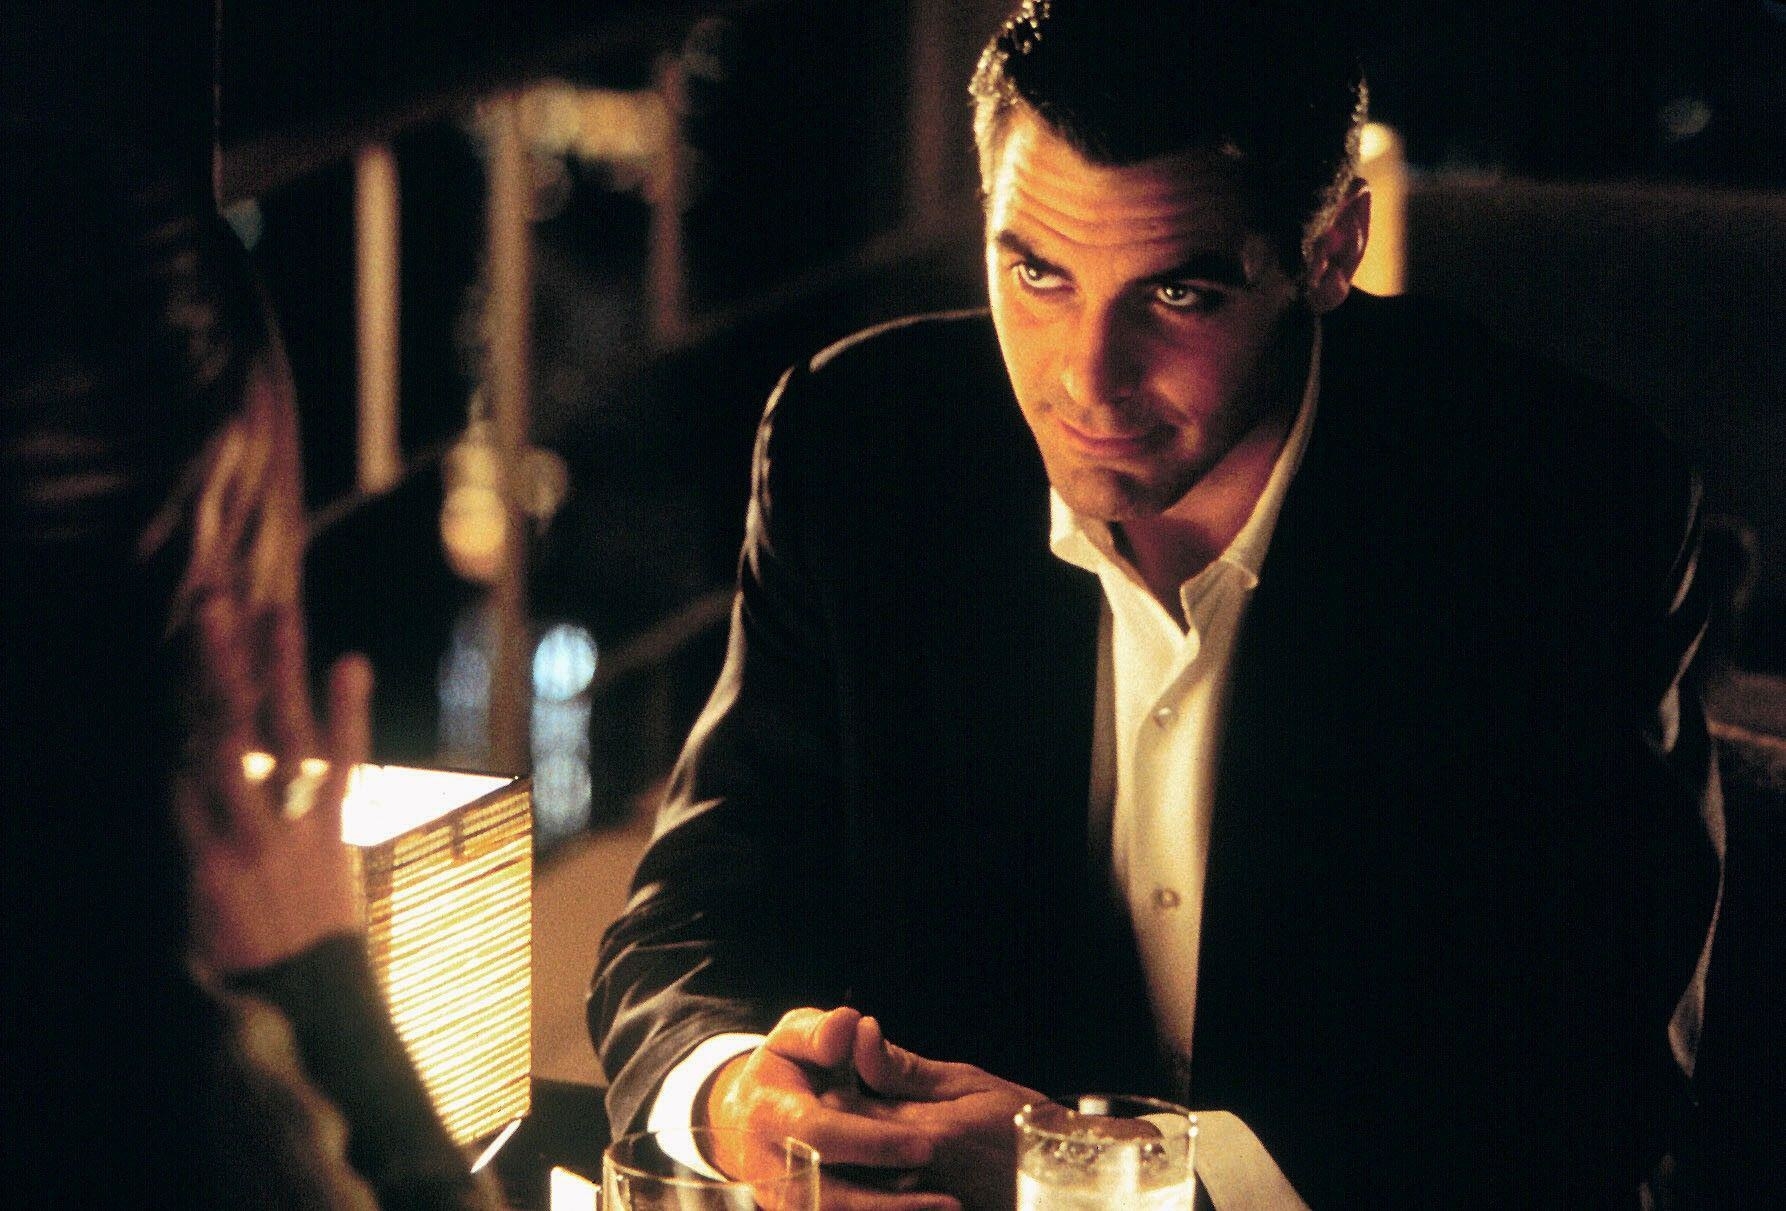 George Clooney stares seductively in a dark upscale restaurant